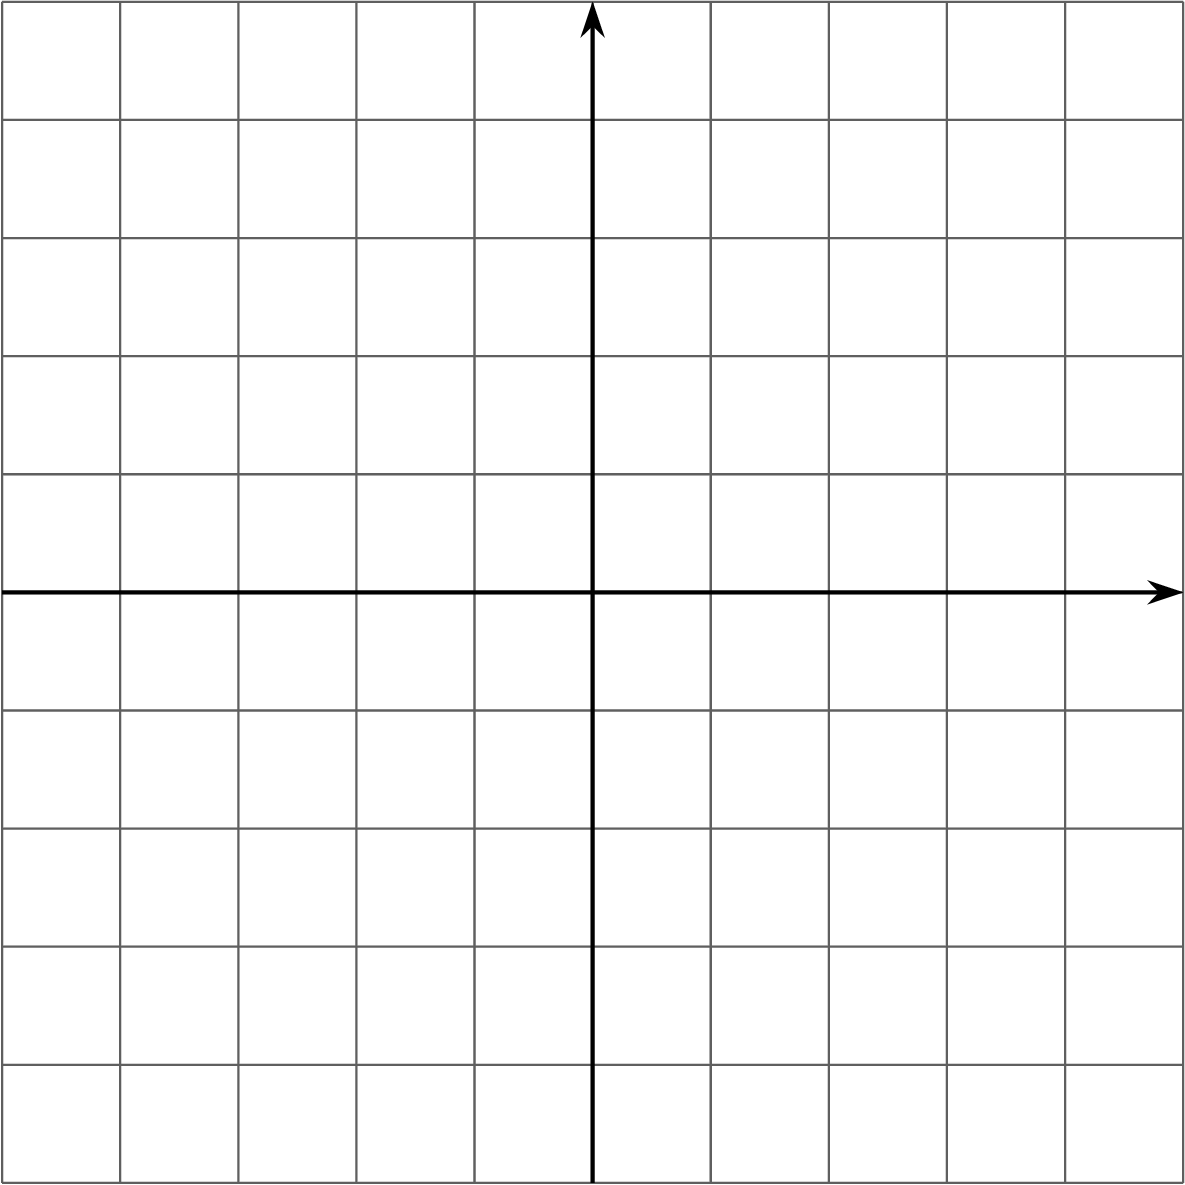 A blank coordinate grid. Both the horizontal axis and vertical axis have 9 evenly spaced units